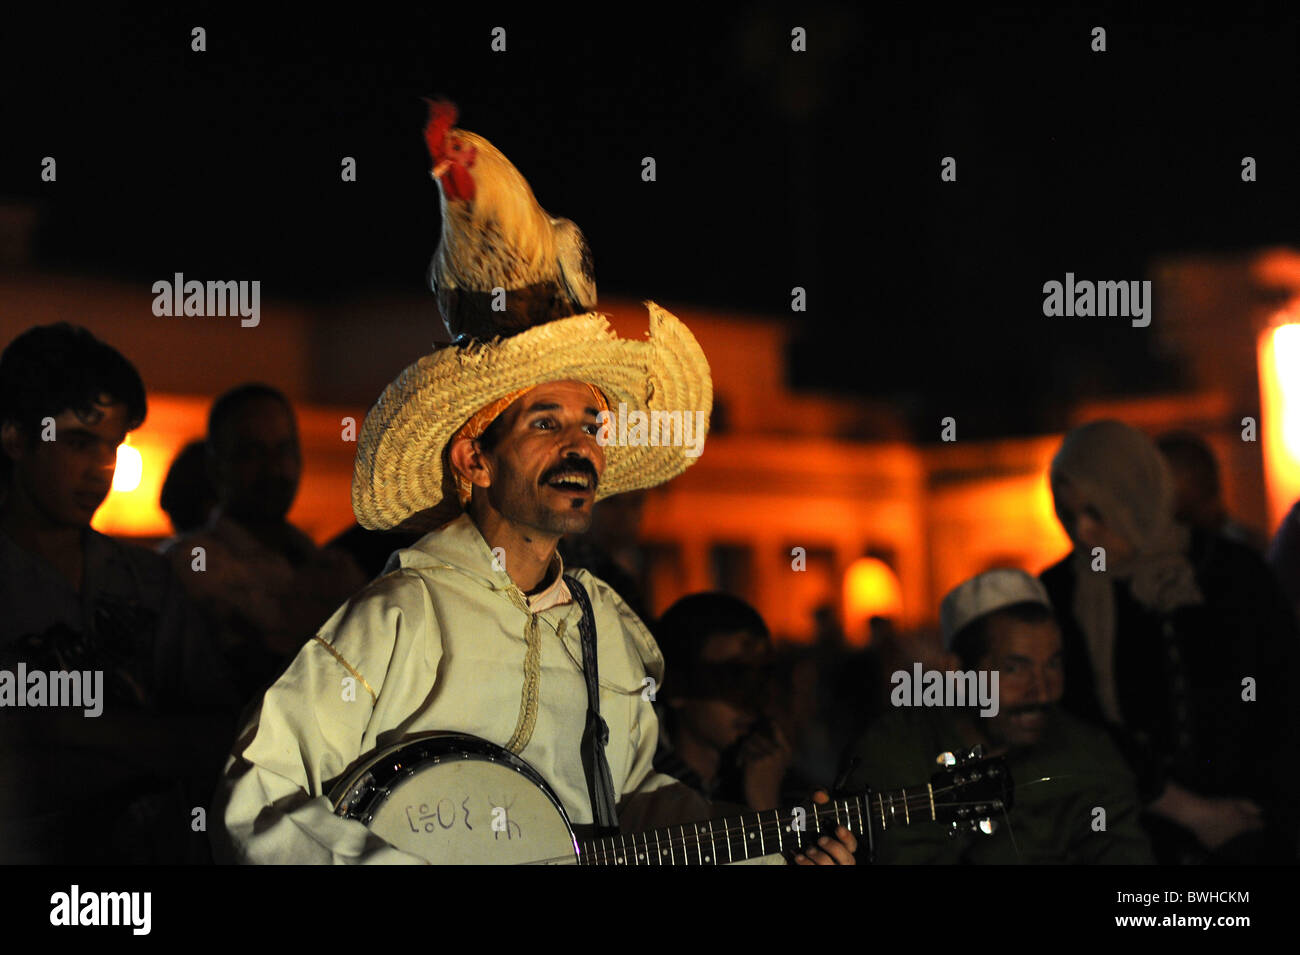 Performance of traditional Moroccan folksong in the main square in Djemaa el Fna, Marrakesh. Stock Photo